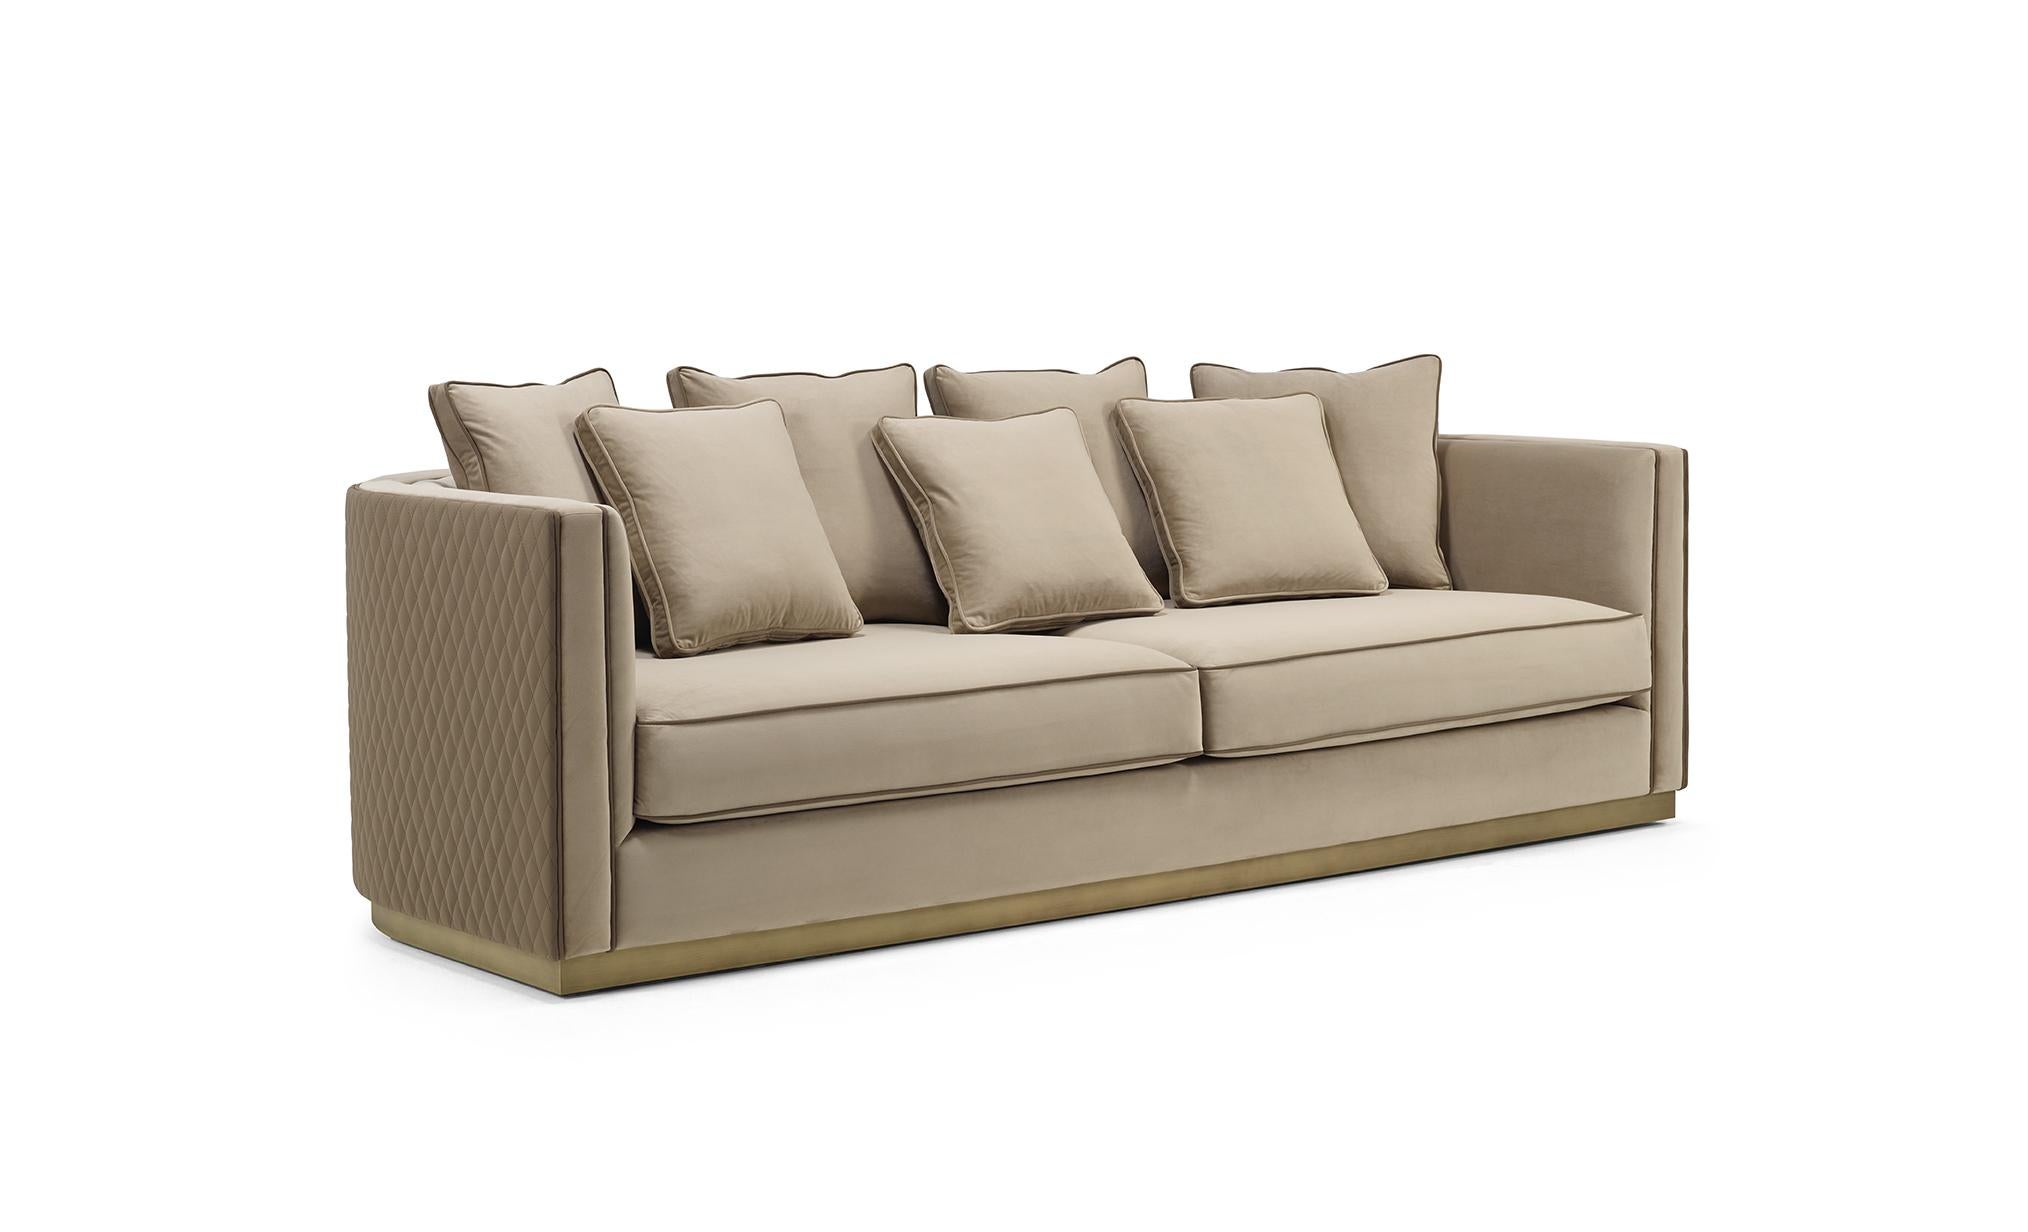 GRANT is a distinguished sofa, with an enveloping backrest and an extremely refined design, complemented by feather-composed cushions for a superior comfort feeling. Grant allows the combination of different textures on the back and cushions,